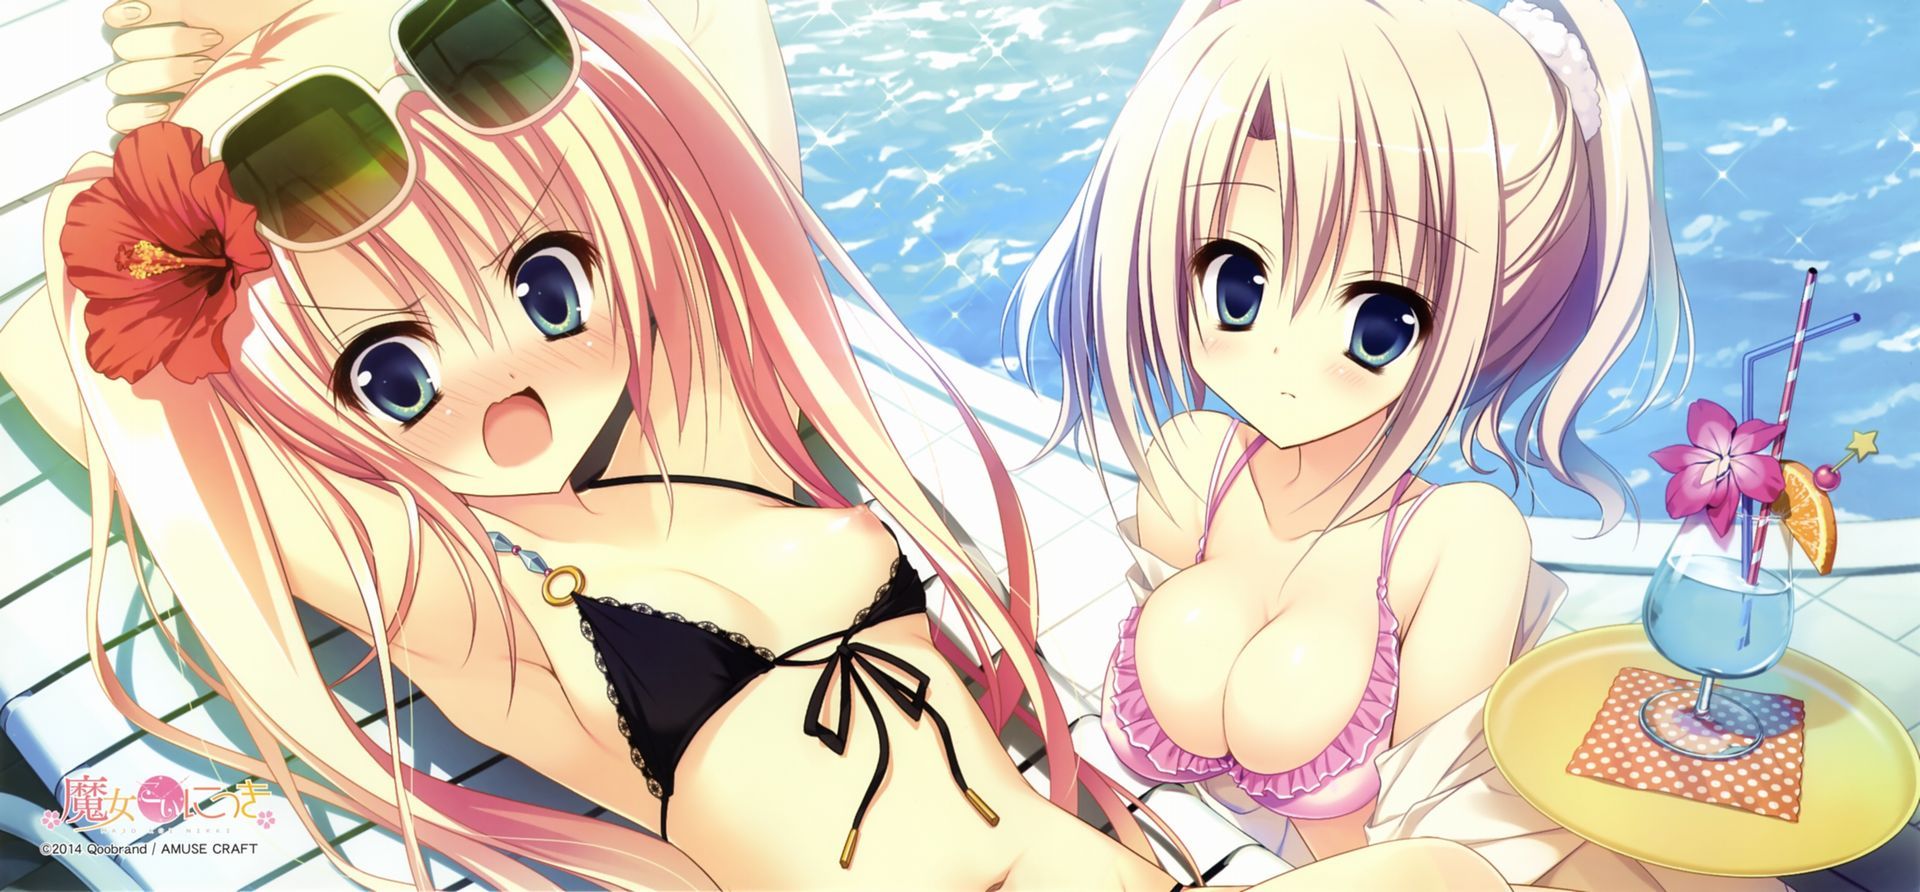 Swimsuits are erotic I can't believe I'm flossing in such a way, just like pants round dashi 5